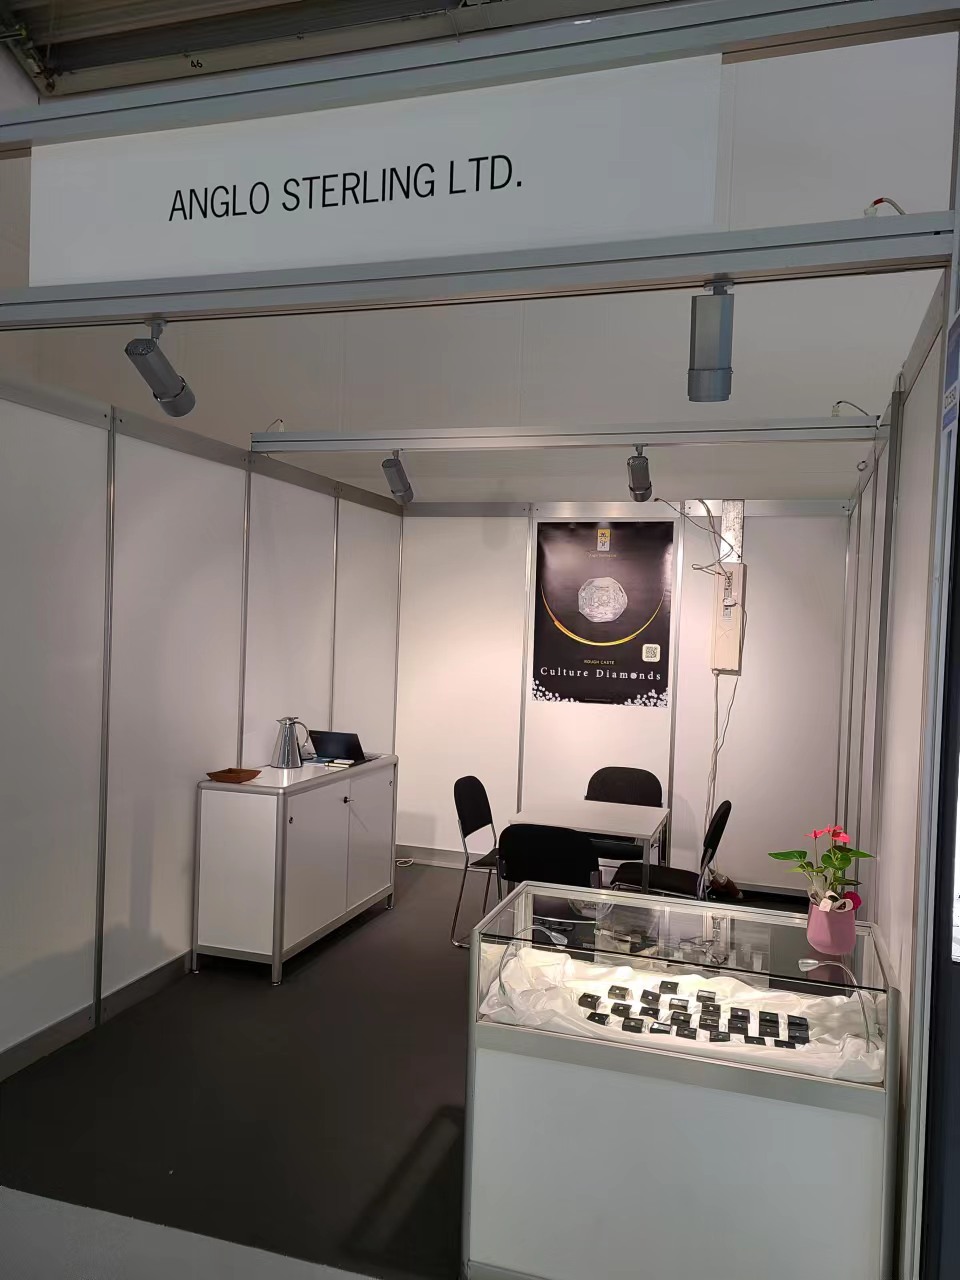 You are currently viewing INHORGENTA MUNICH Exhibition, Europe’s leading platform for jewelry and gemstones.